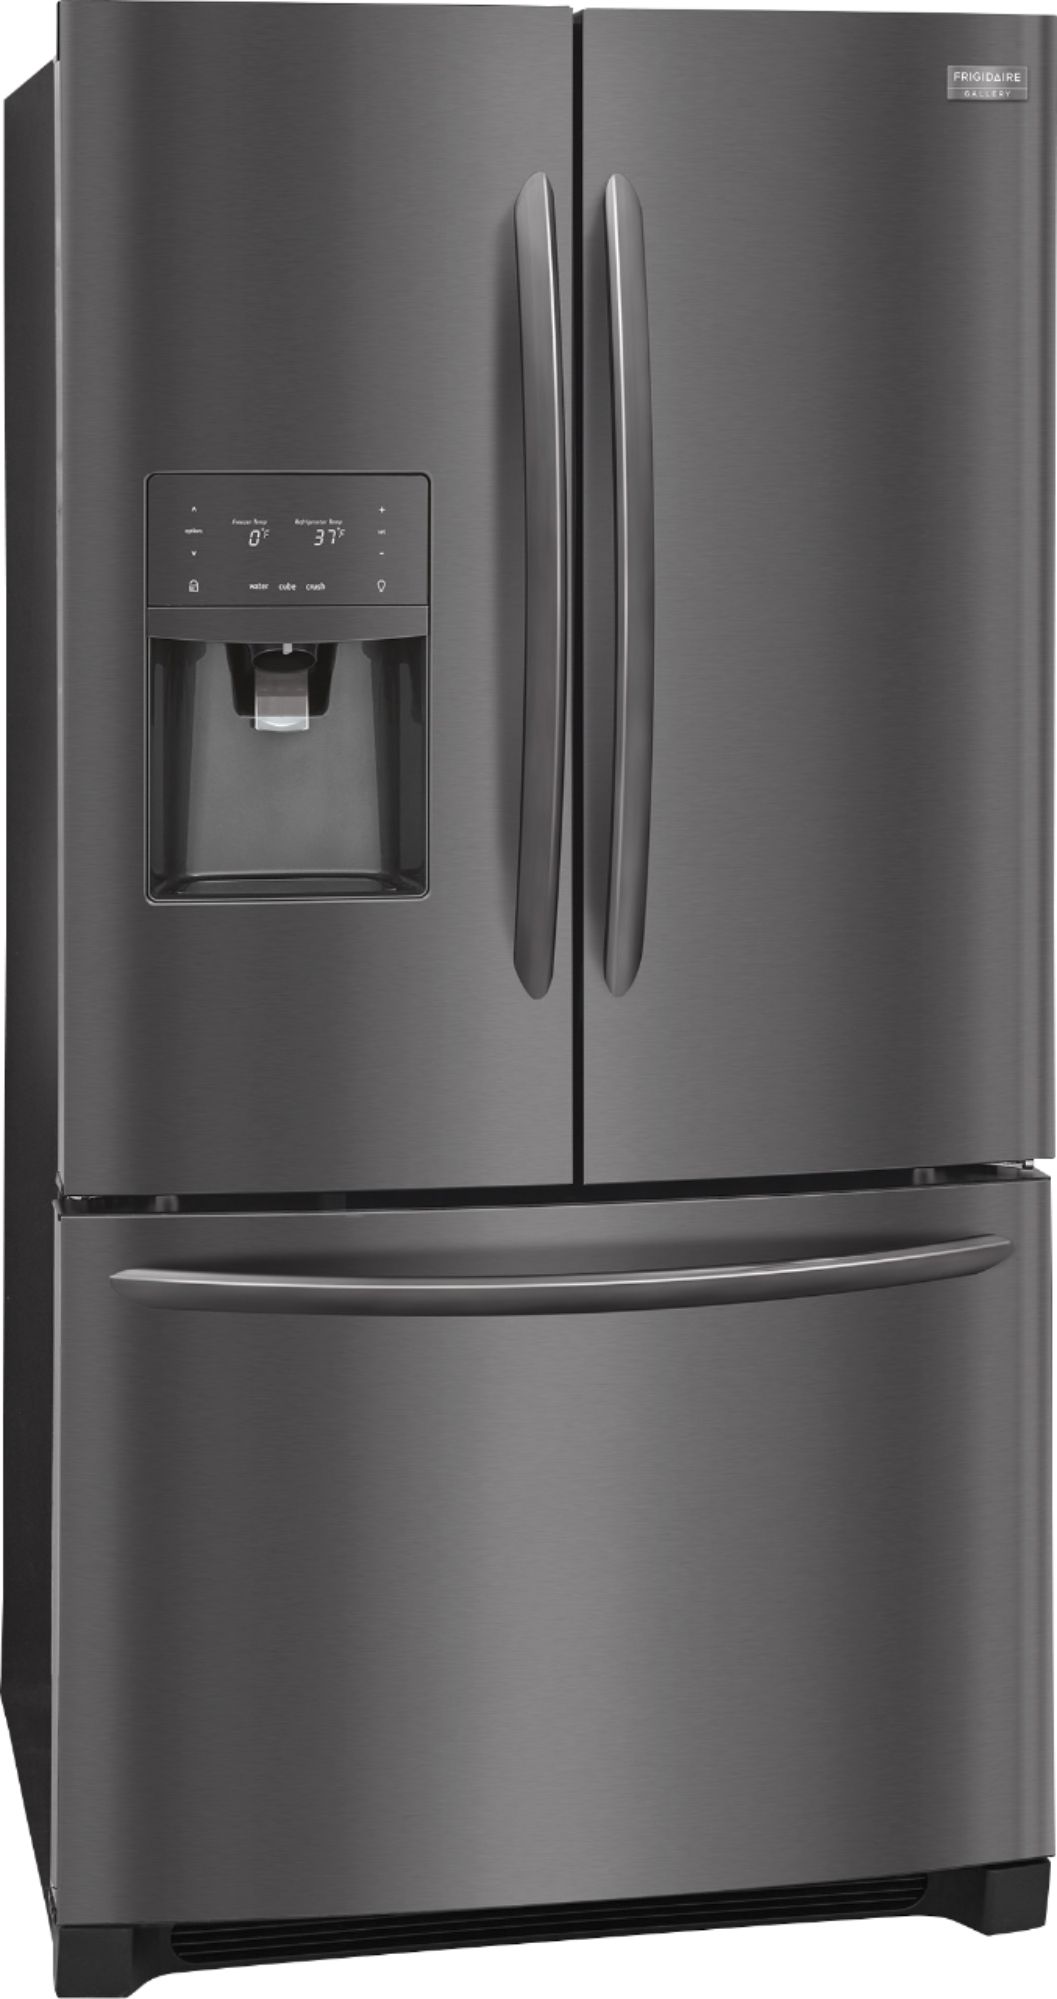 Angle View: Frigidaire - Gallery 26.8 Cu. Ft. French Door Refrigerator - Black Stainless Steel